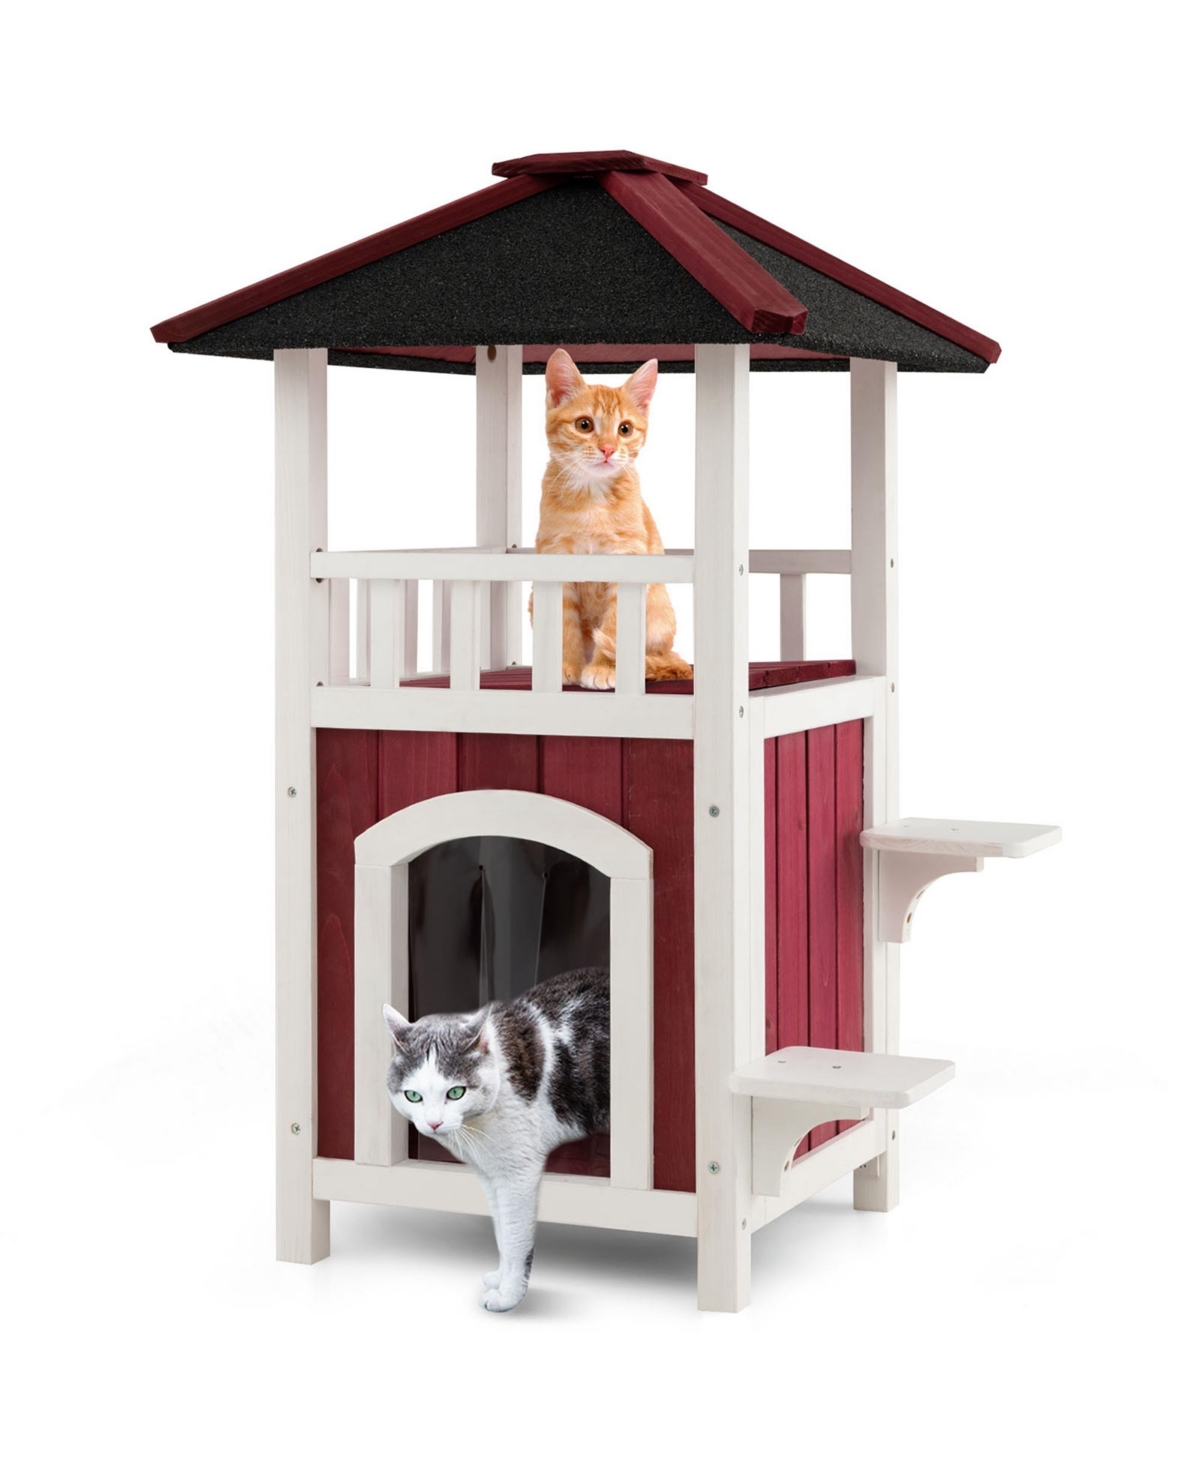 Outdoor Cat House 2-Story Wooden Cat Shelter with Asphalt Roof Removable Floor - Red